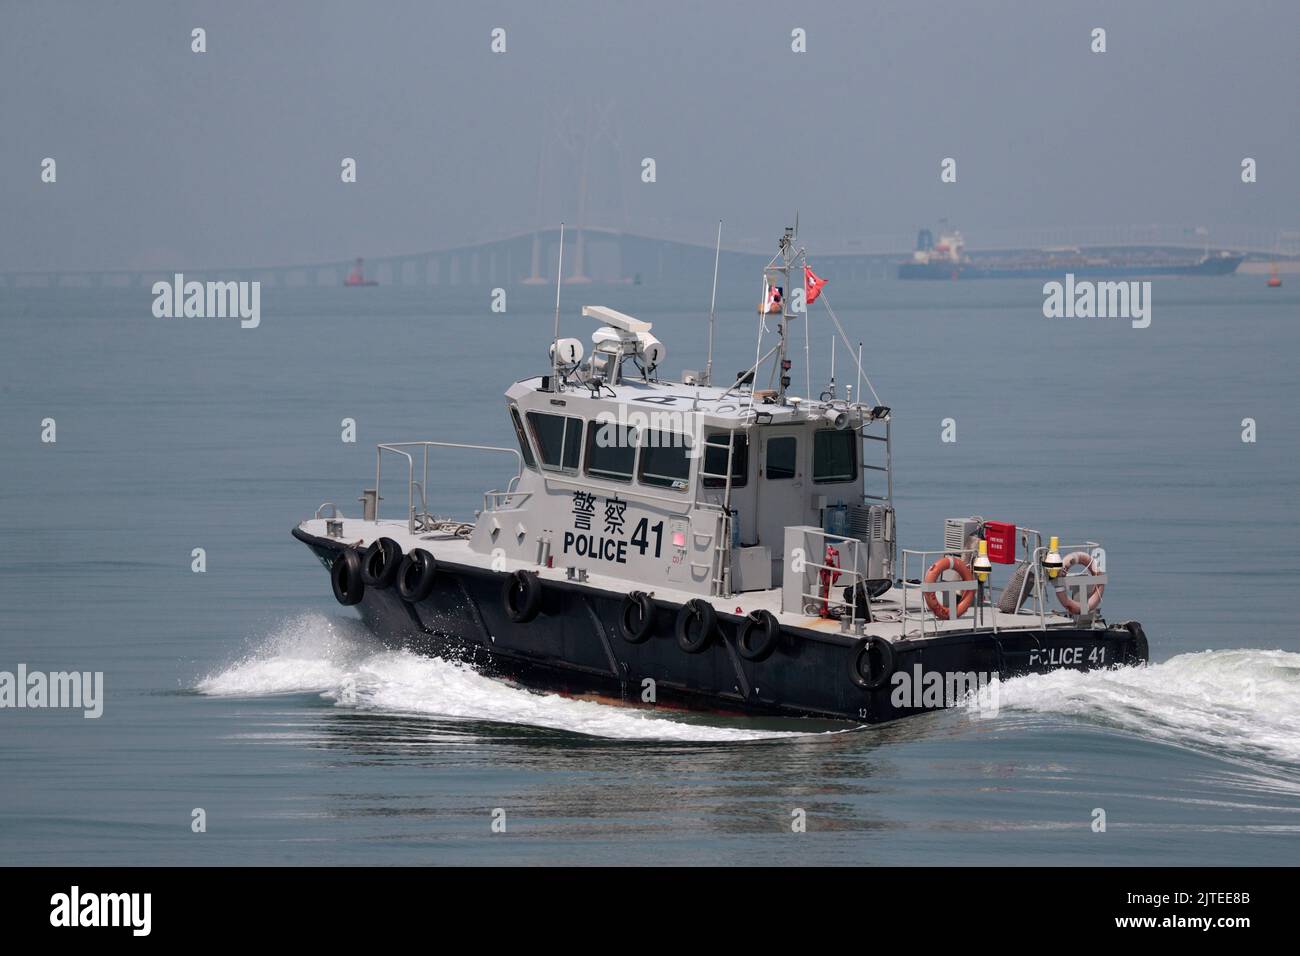 Police Launch 41, western waters, Hong Kong (Pearl River Delta) Stock Photo